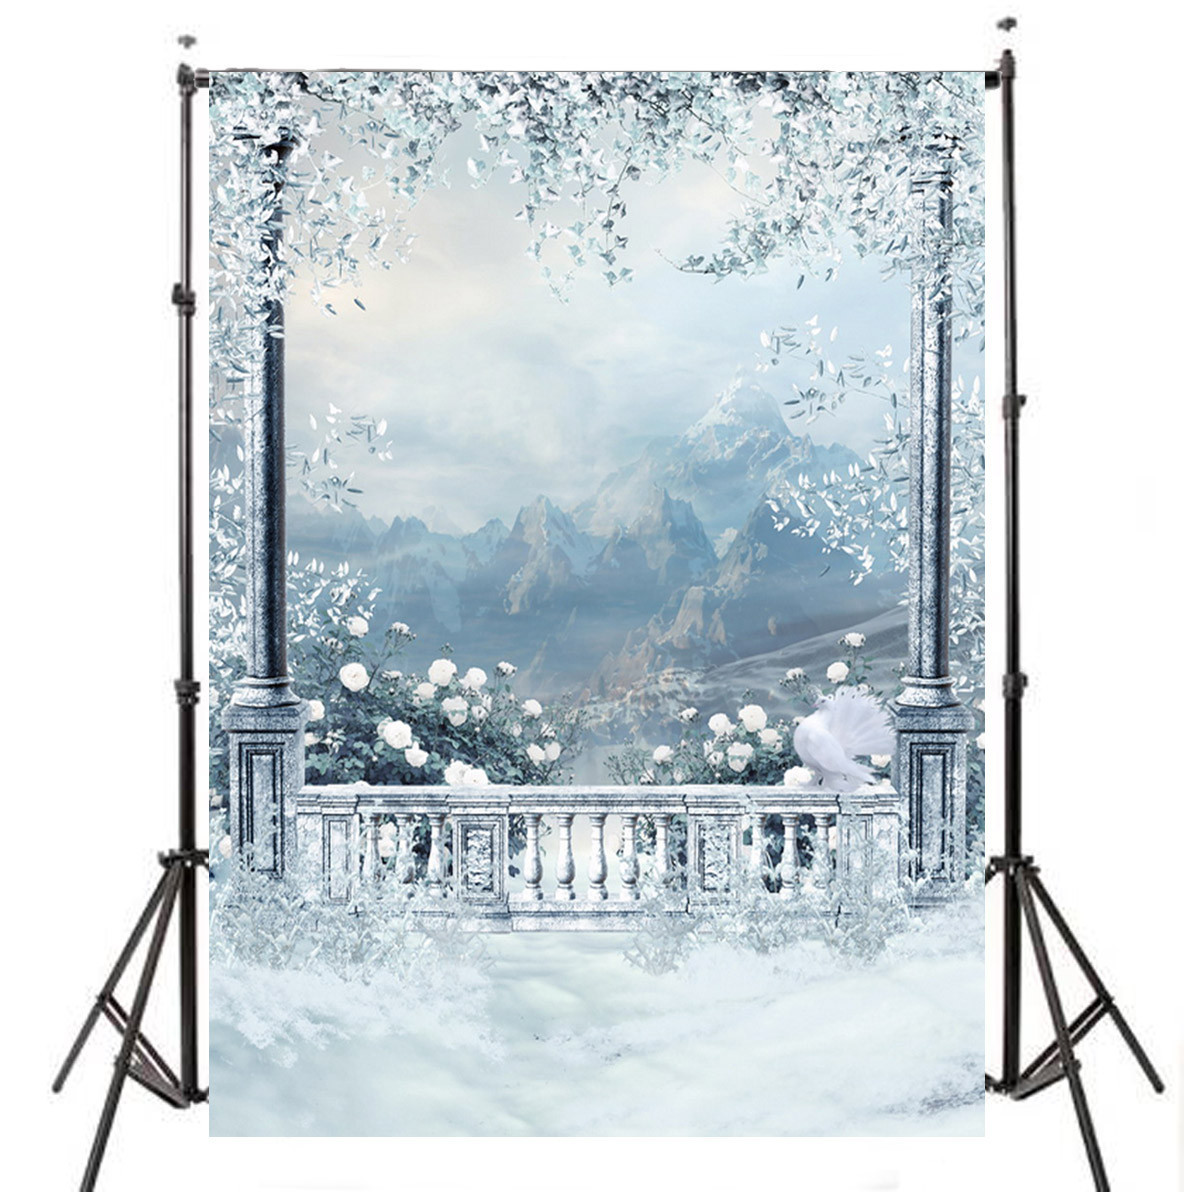 15x21m-Snow-View-Balcony-Studio-Props-Photography-Backdrop-Background-Silk-Material-1289666-1